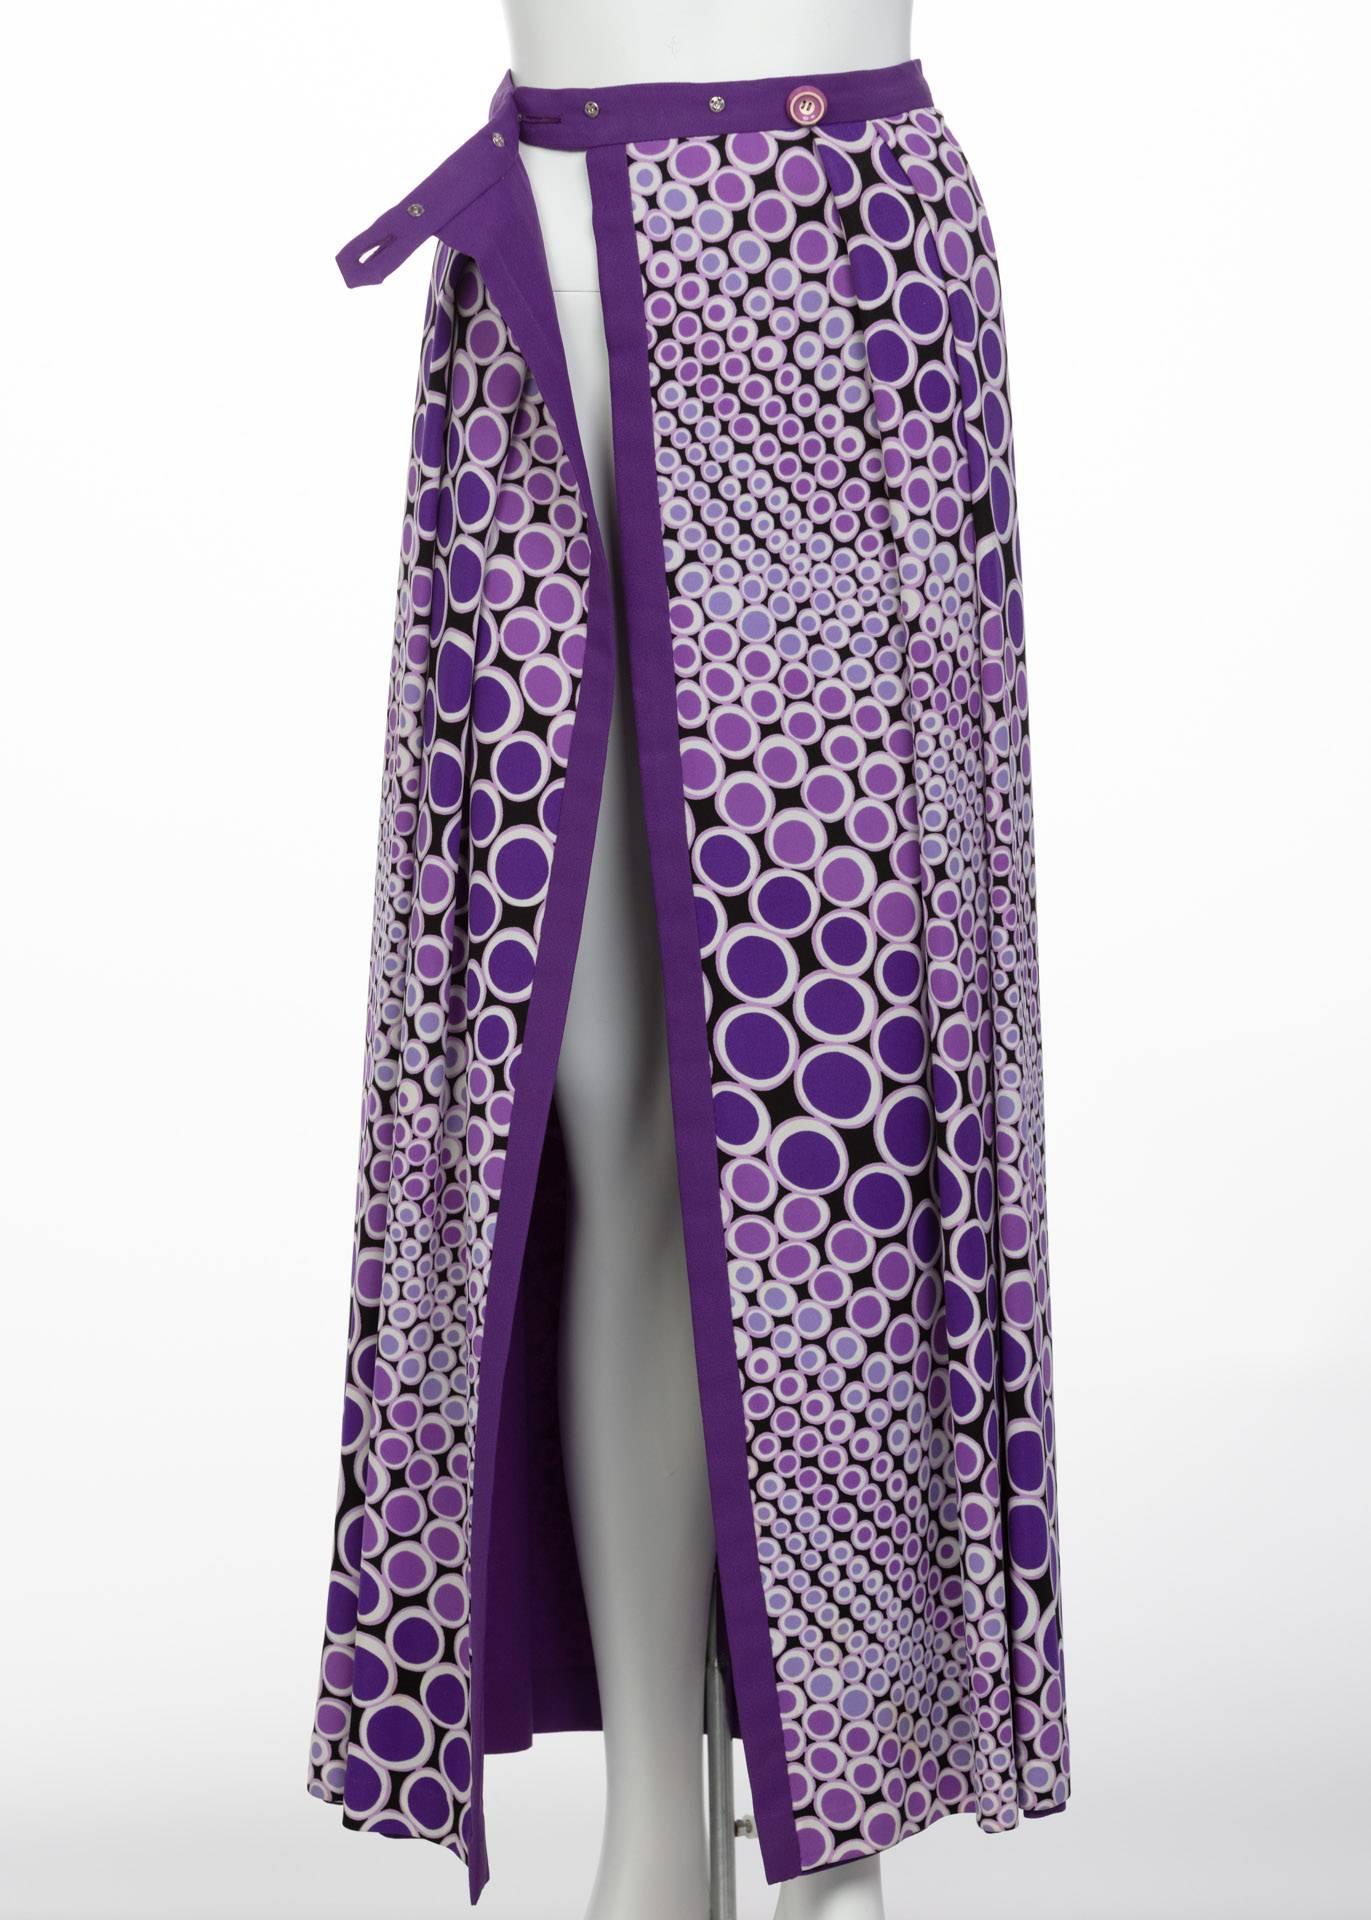 Mod Purple and White Polka Dot Maxi Wrap Skirt, 1970s  For Sale 1